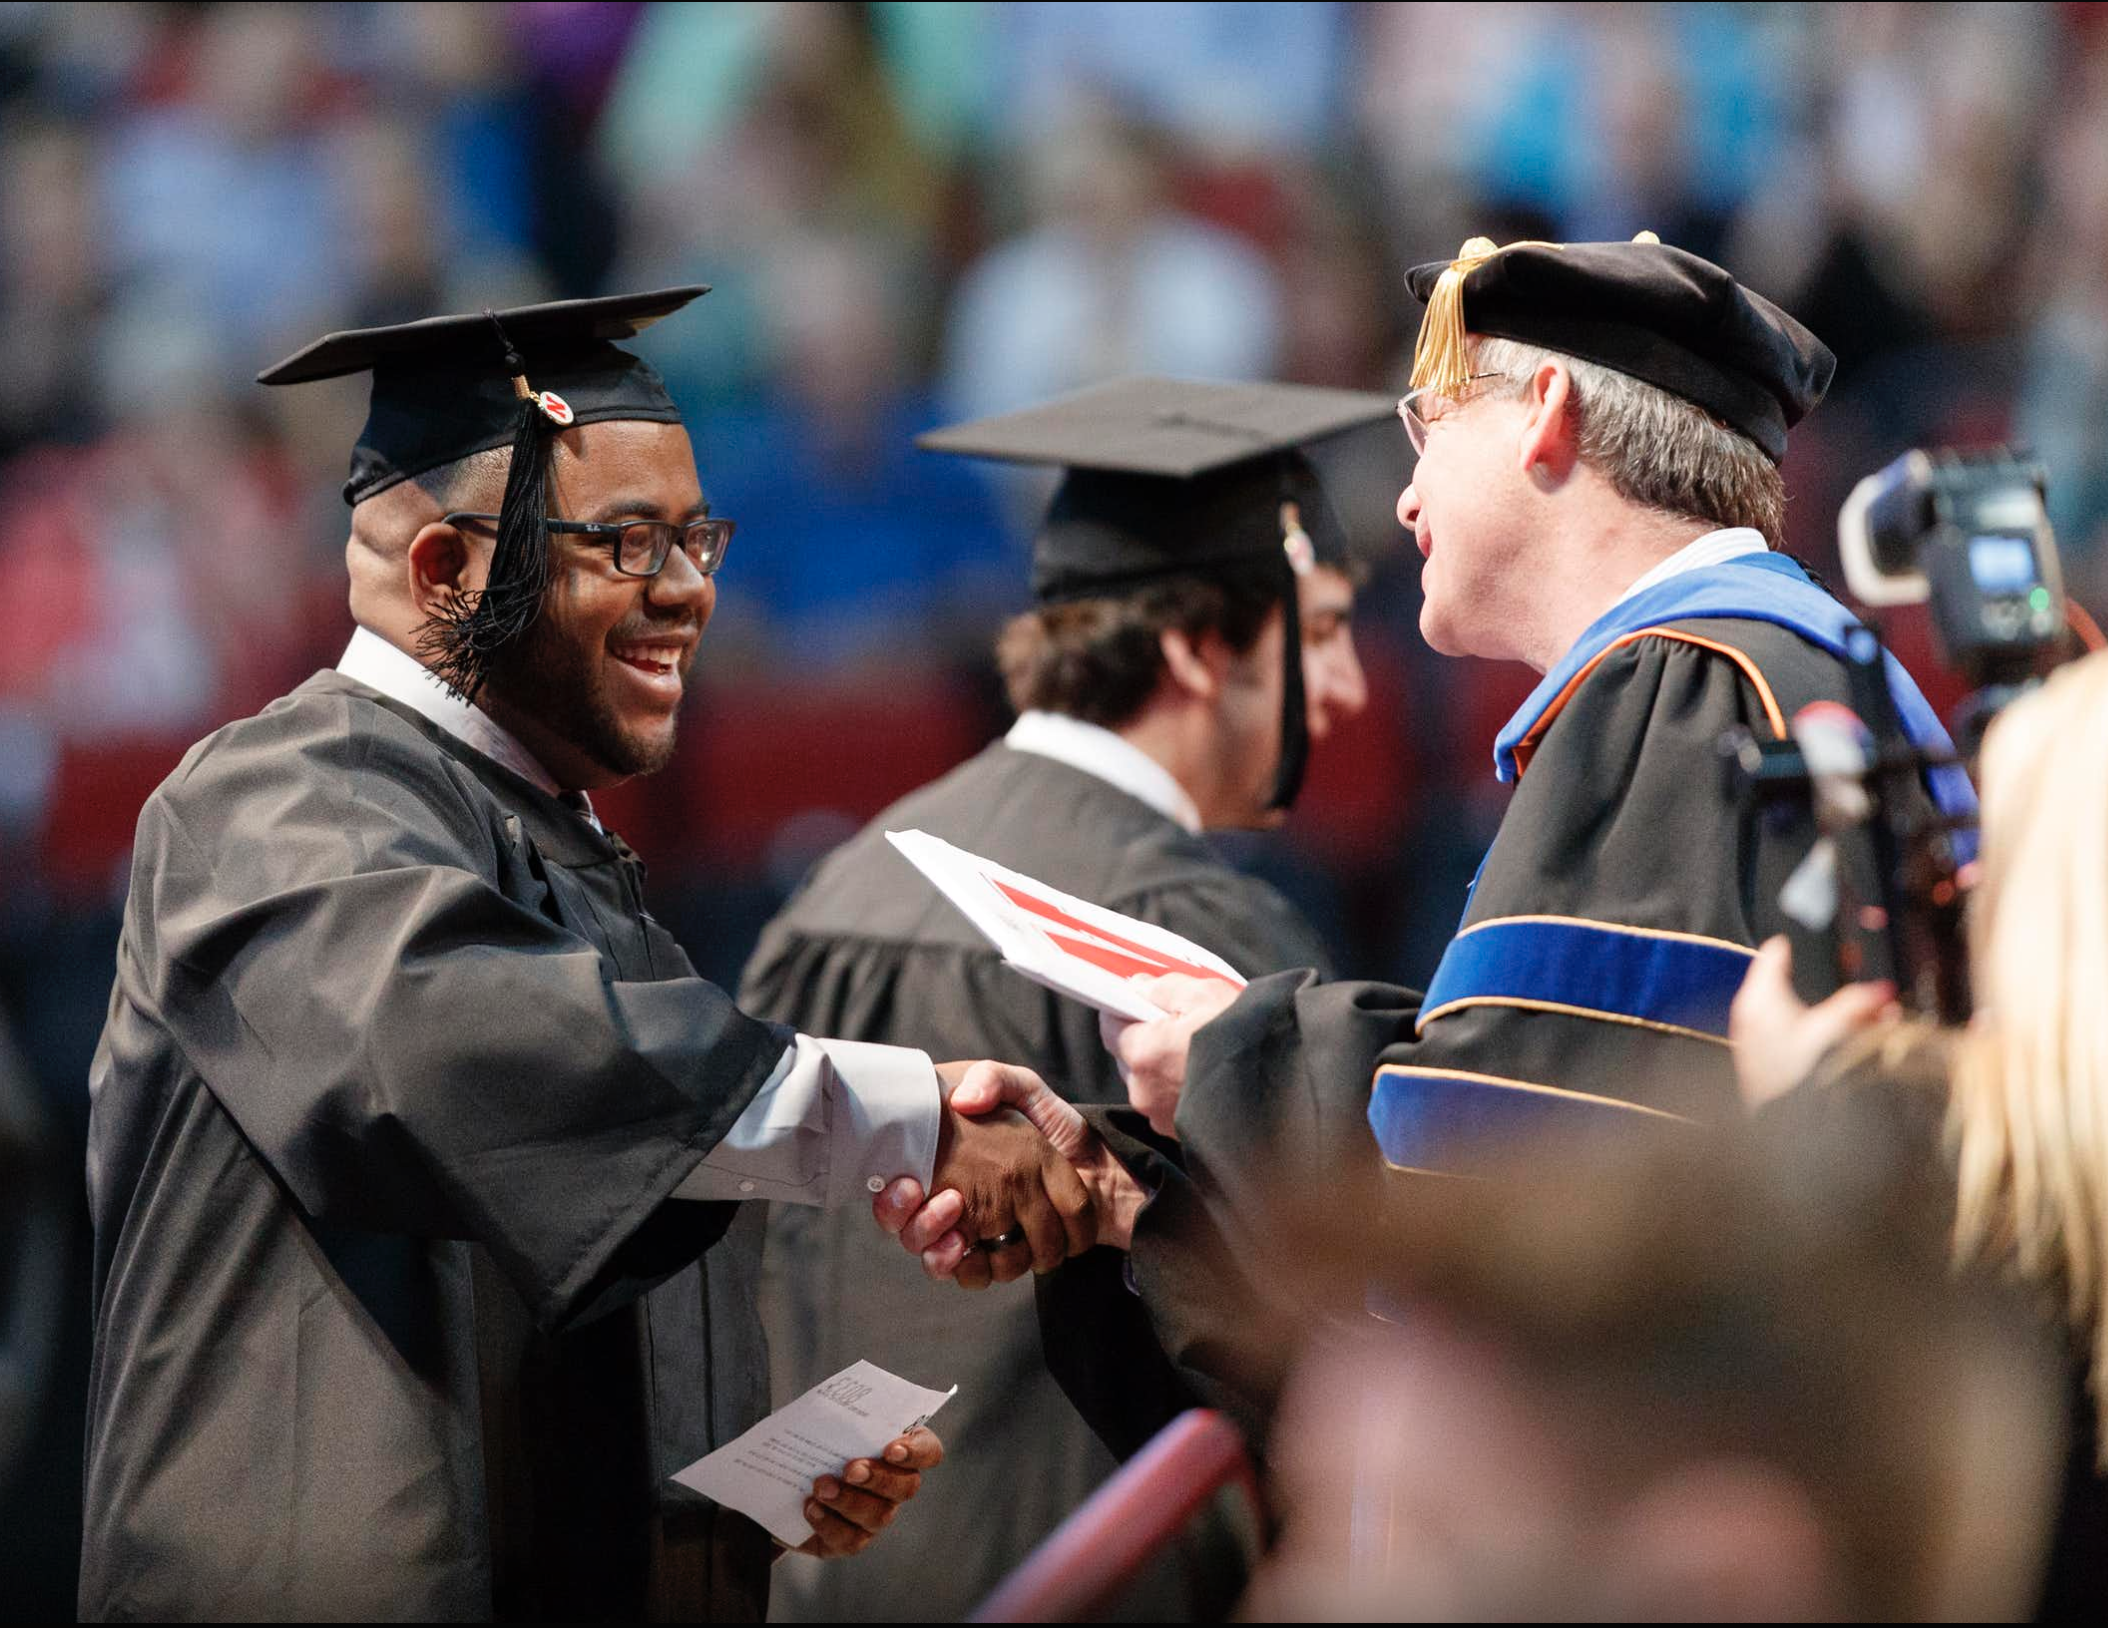 Commencement ceremonies for the College of Engineering are Friday and Saturday, May 4 and 5.